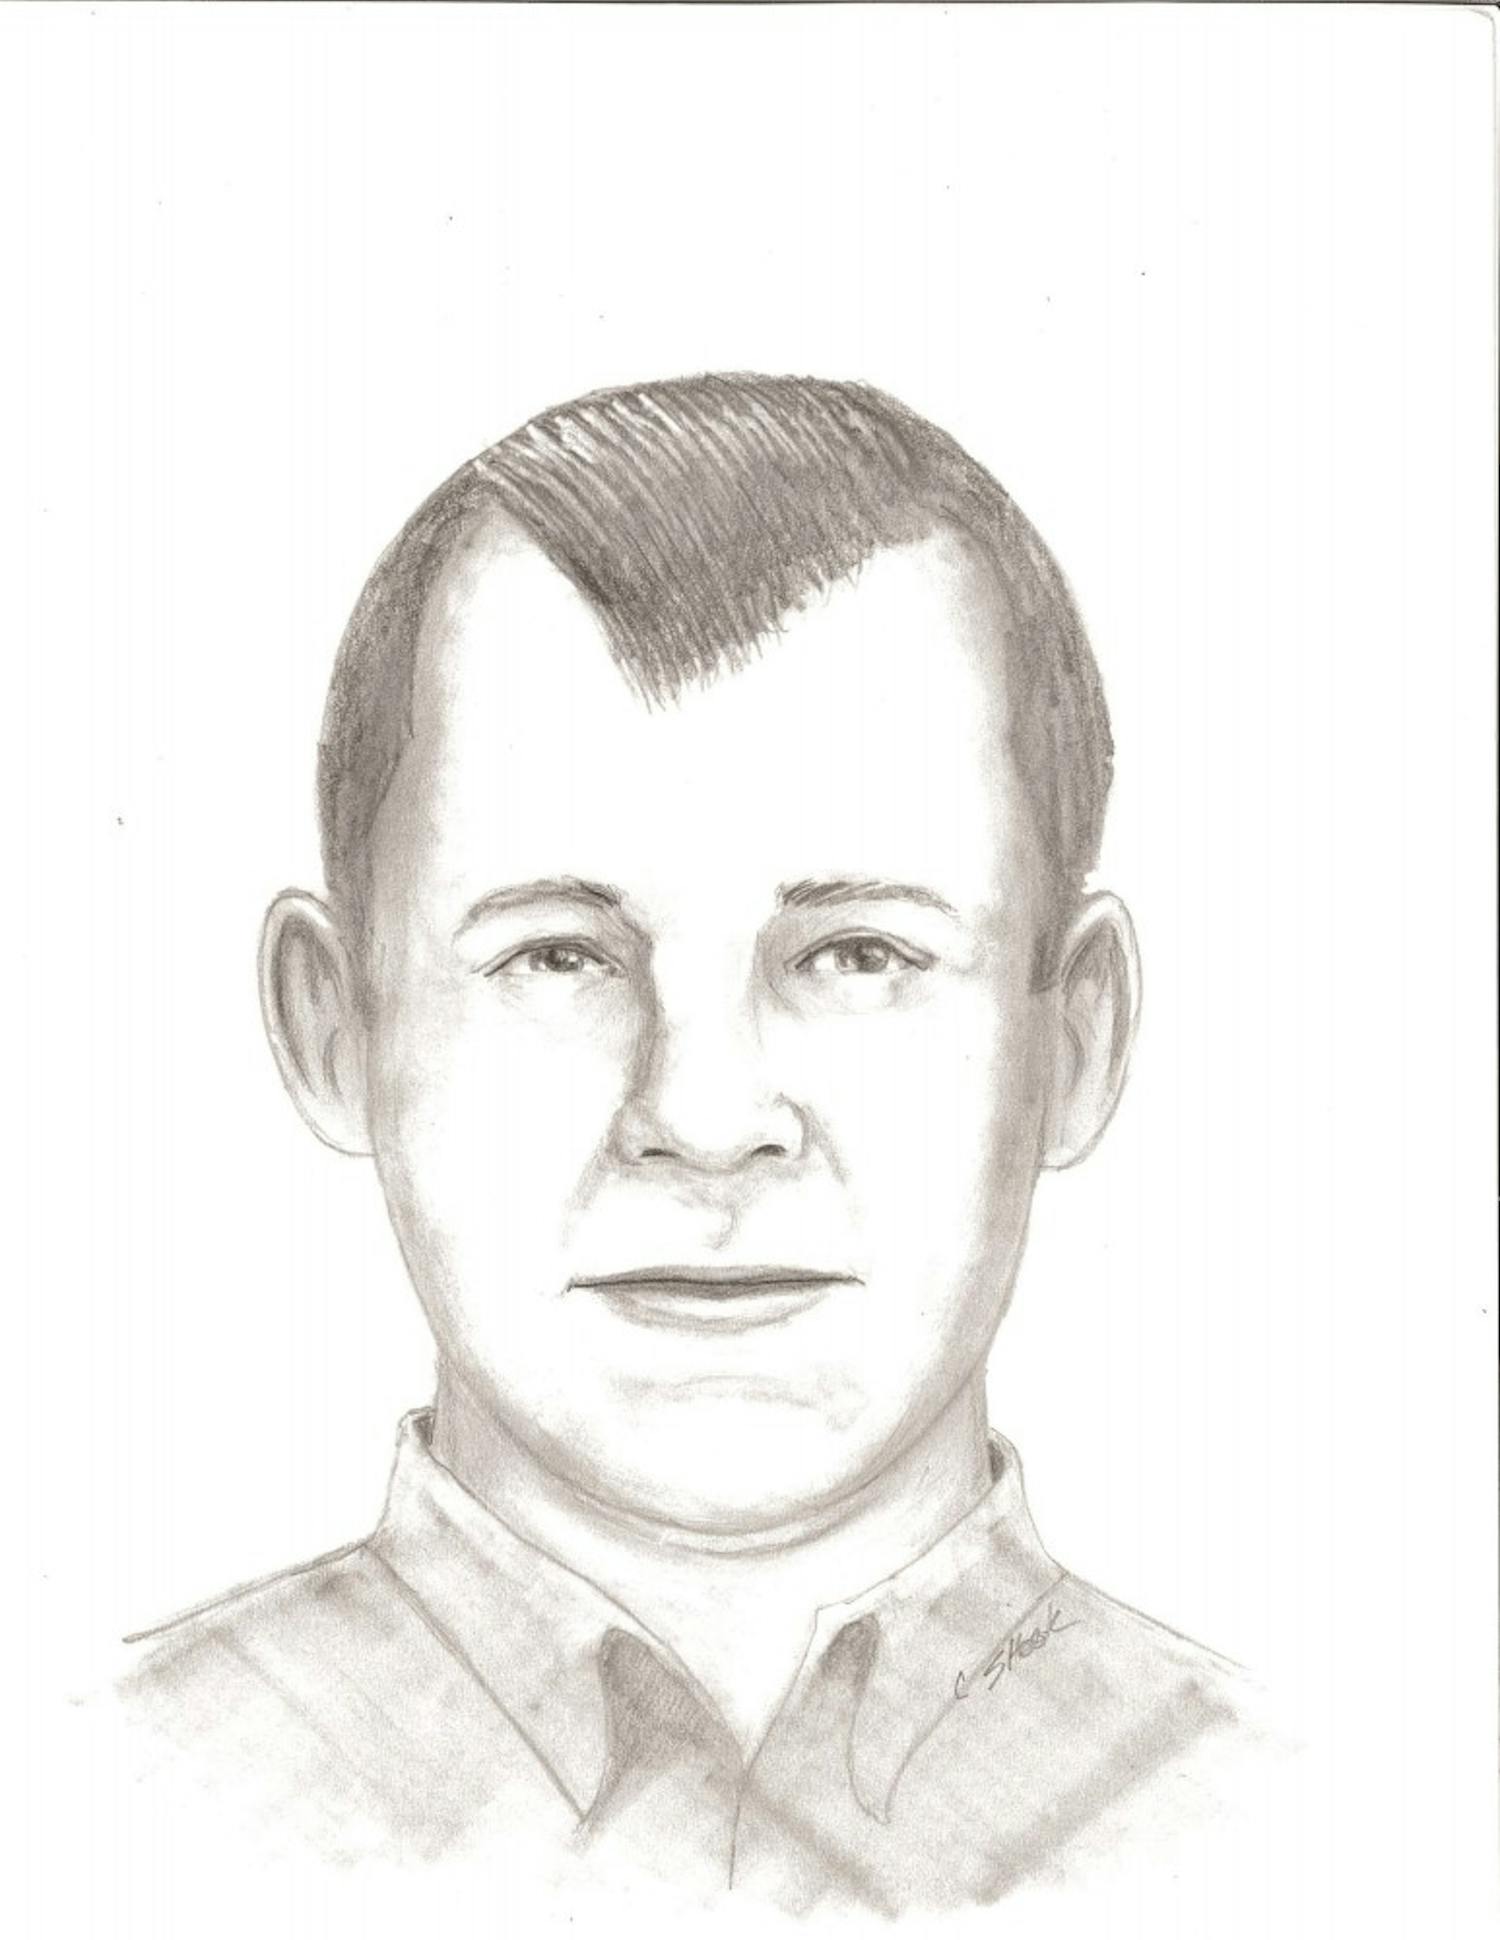 One of two sketches of the March 16, 2018, PNC Bank robbery suspect the Auburn Police Department released on March 26, 2018. This sketch is rendered with thinner lips.